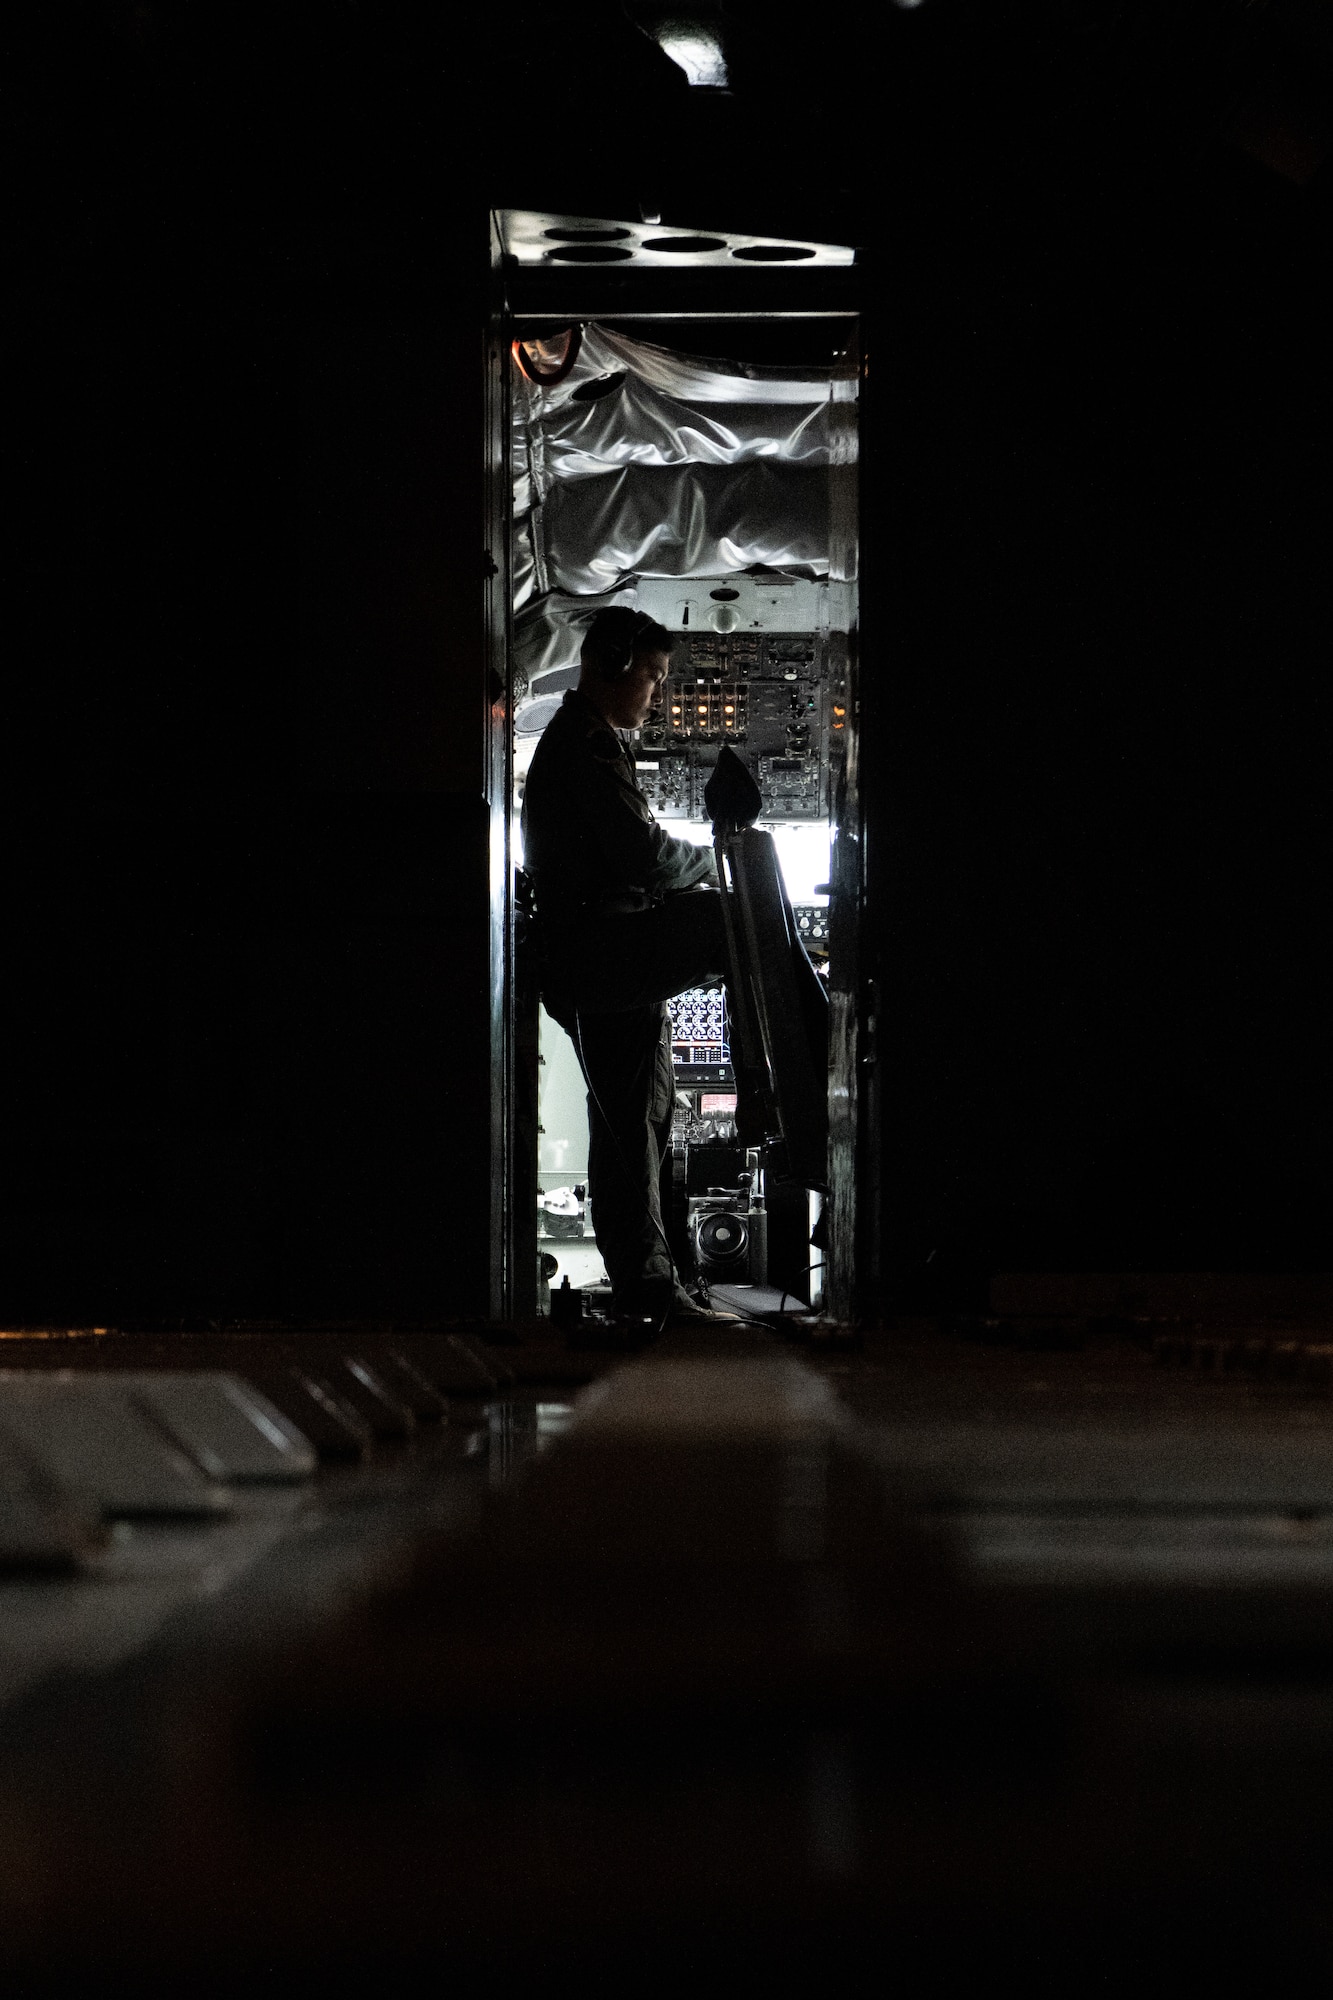 An Airman stands in the doorway on a KC-135.